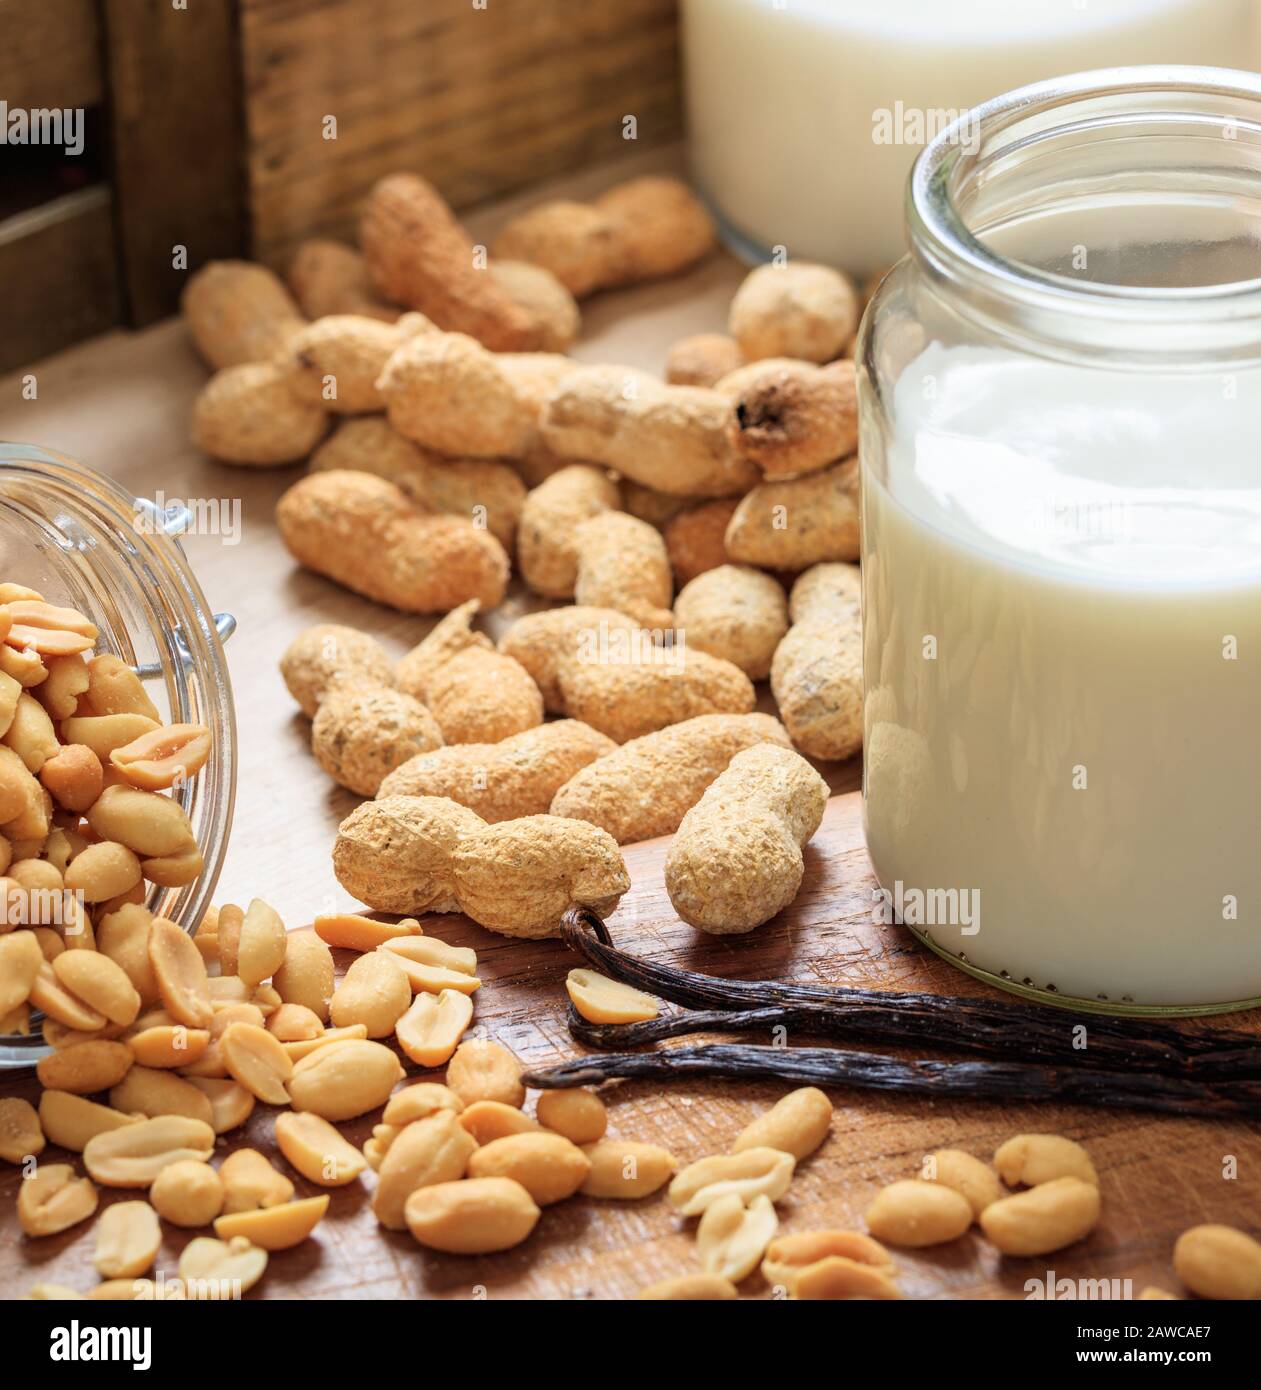 Peanut milk non dairy milk substitute on a wooden table. Nuts and glass with milk, lactose free milk substitute for vegans Stock Photo